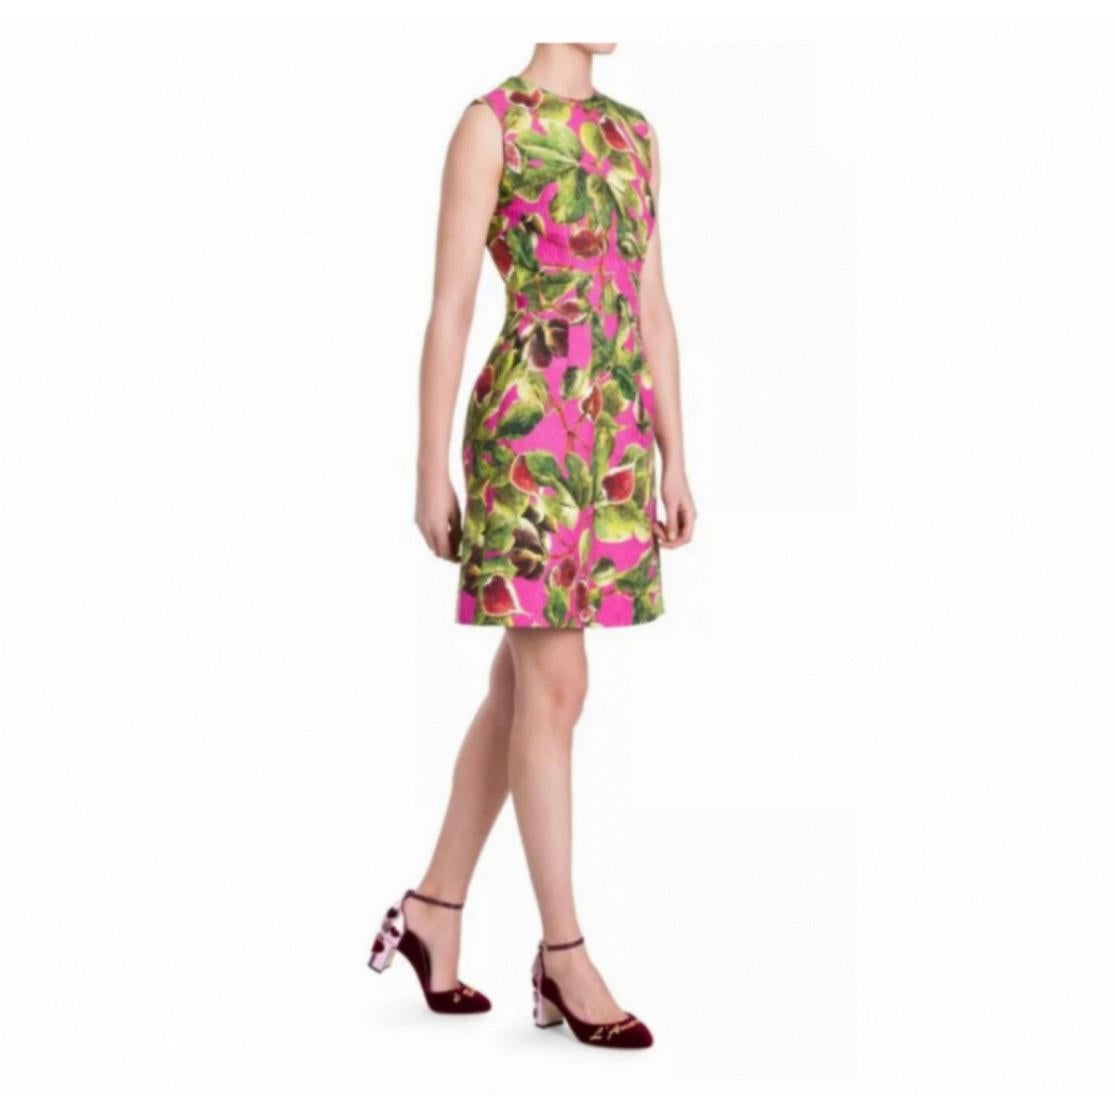 Women's Dolce & Gabbana brocade Figs
Printed mid length dress For Sale